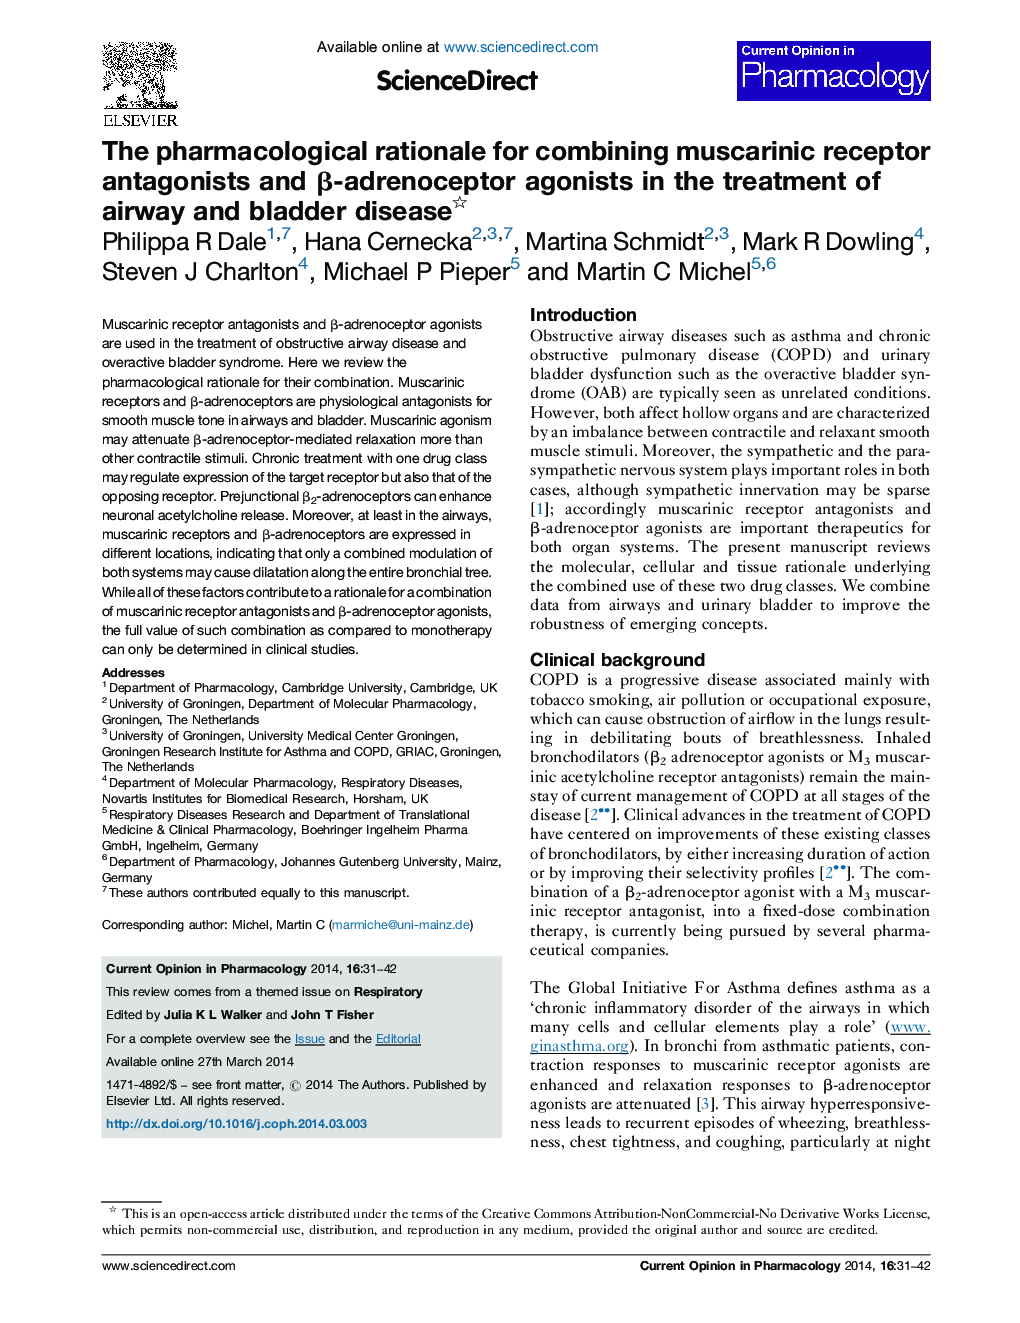 The pharmacological rationale for combining muscarinic receptor antagonists and Î²-adrenoceptor agonists in the treatment of airway and bladder disease